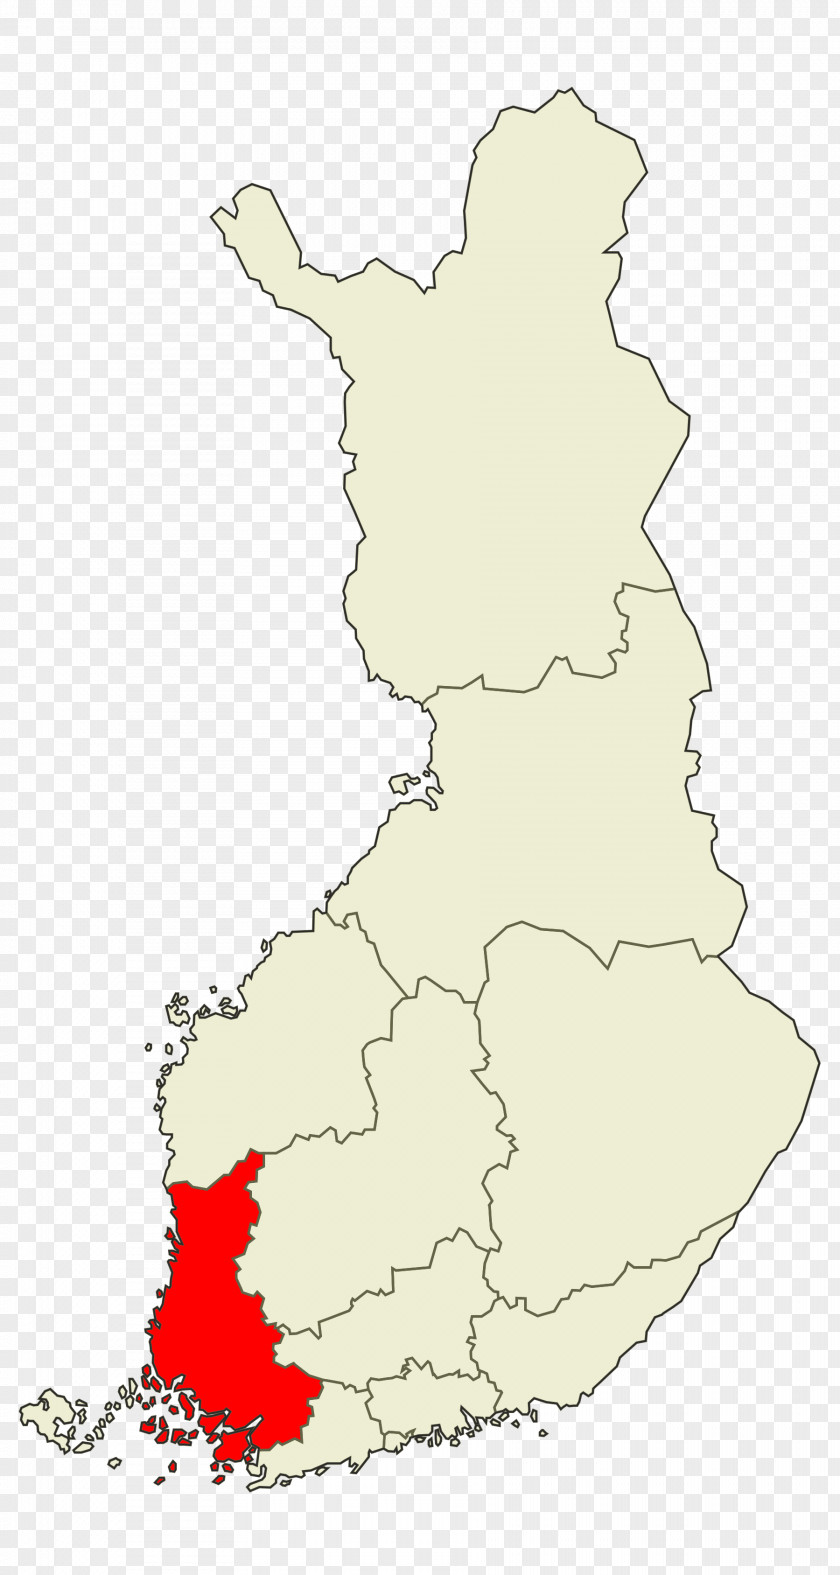 Central Finland Pargas Pukkila Sub-regions Of City PNG